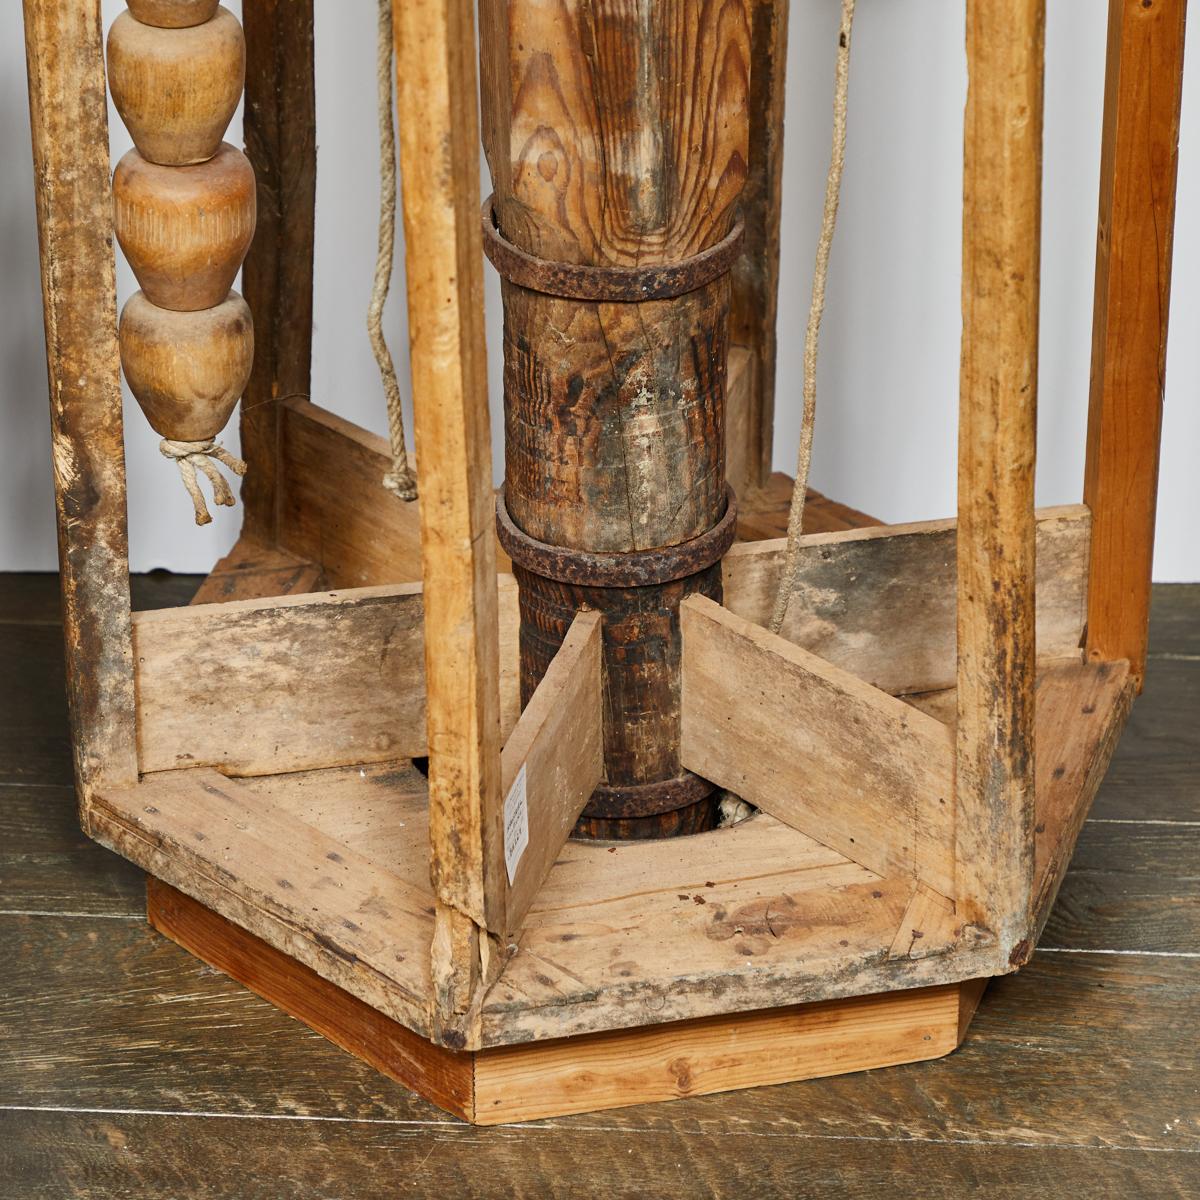 Late 19th Century 1880s Wood Grain Element as Sculpture